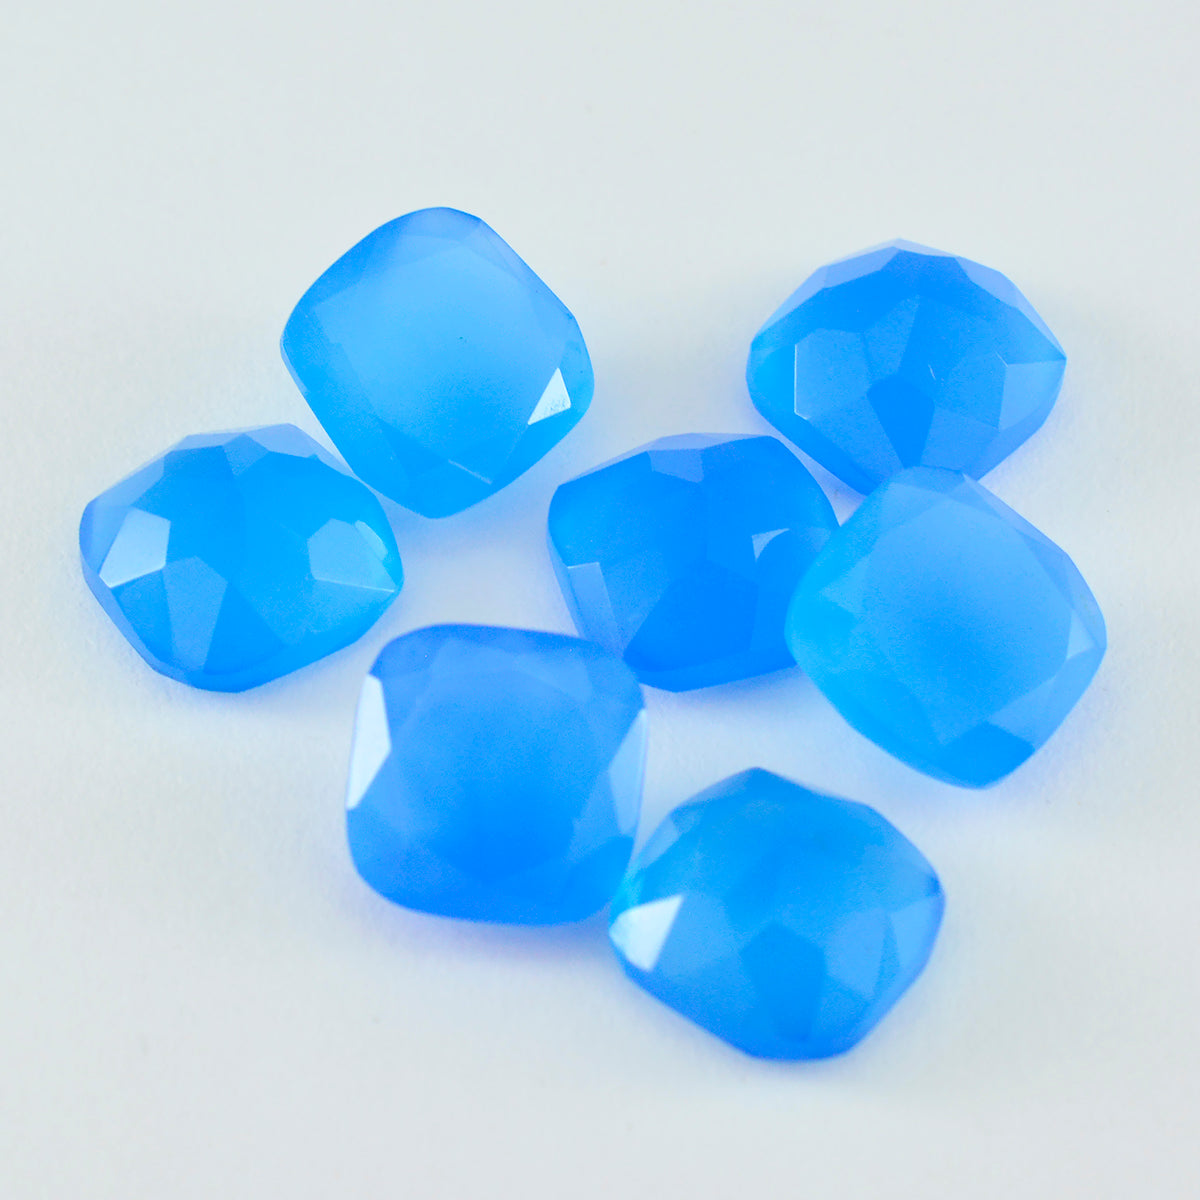 Riyogems 1PC Natural Blue Chalcedony Faceted 7x7 mm Cushion Shape attractive Quality Loose Gemstone